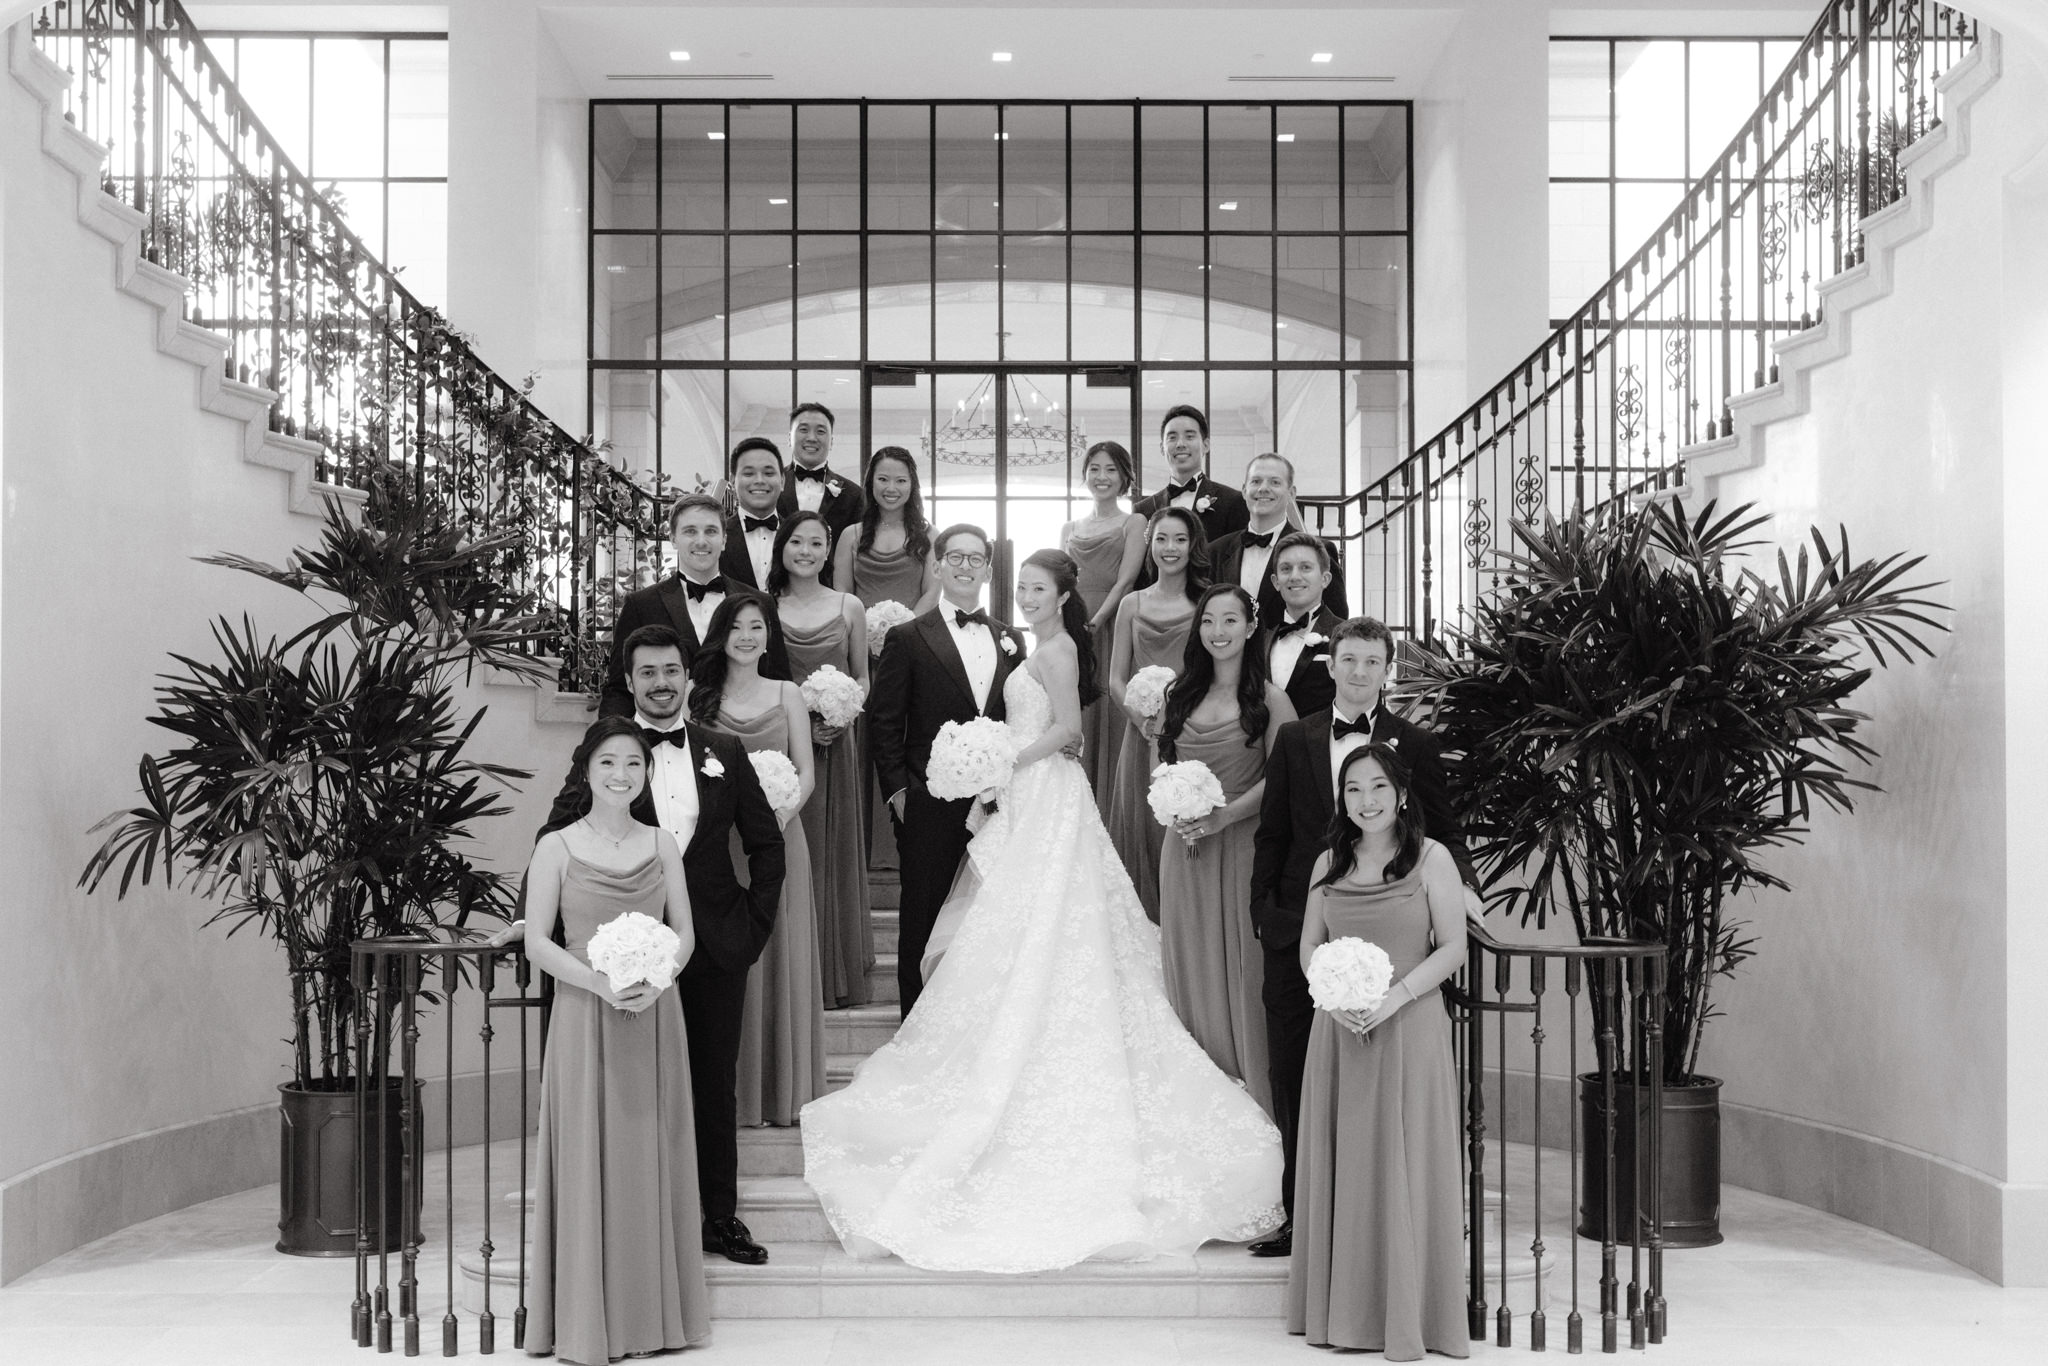 The bride, groom, bridesmaids and groomsmen are standing on the grand staircase. NYC wedding venue image by Jenny Fu Studio